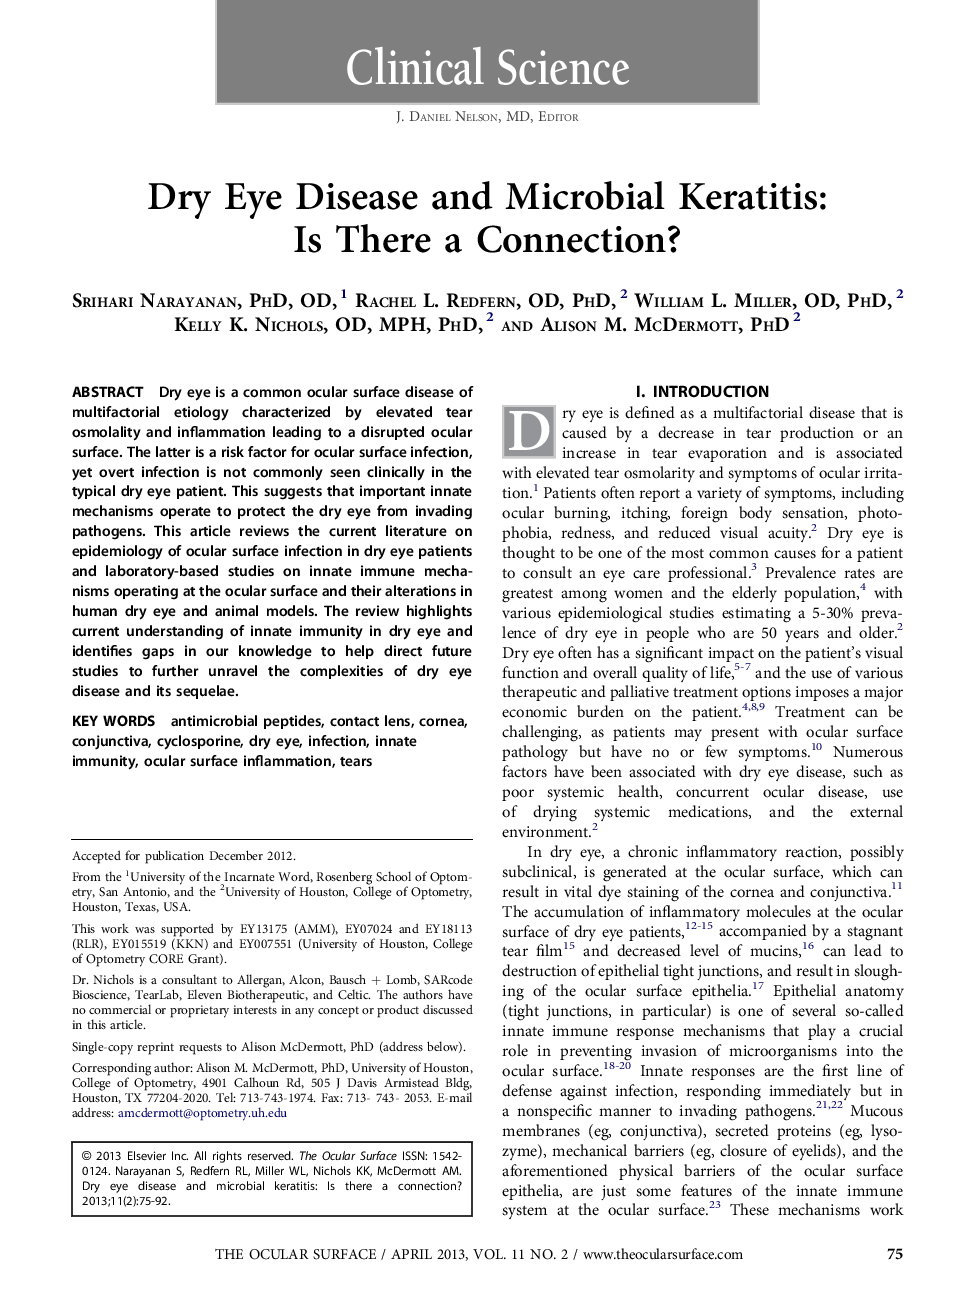 Dry Eye Disease and Microbial Keratitis: Is There a Connection? 